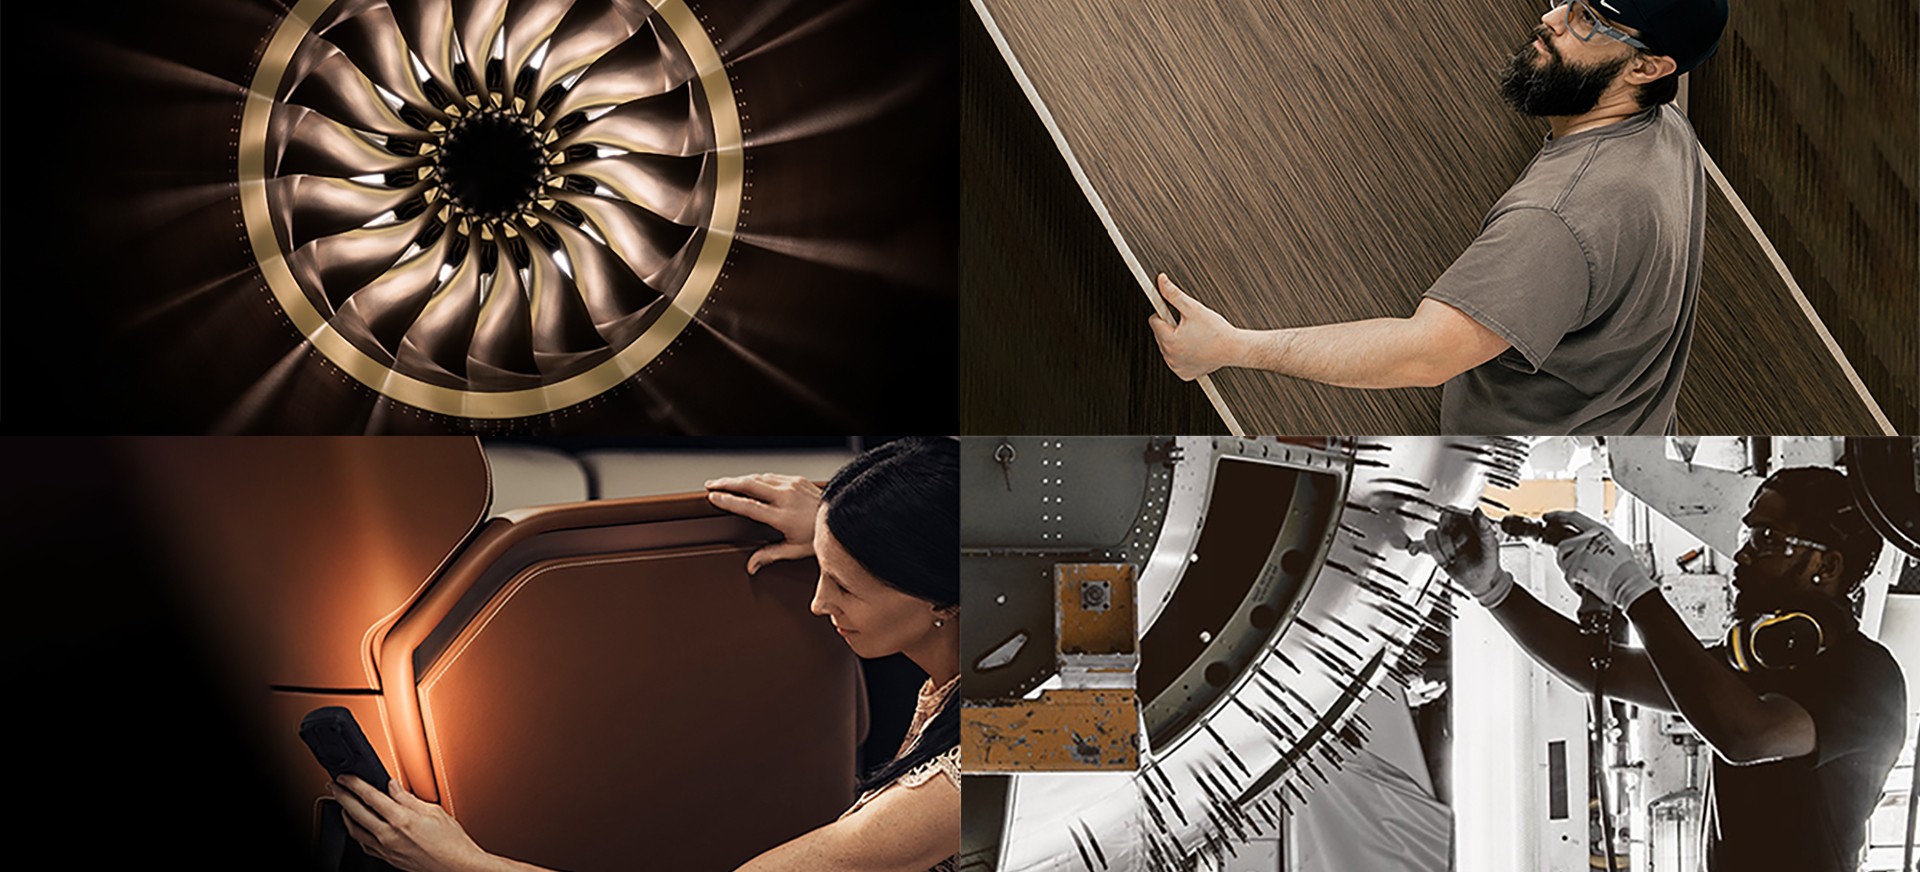 Collage of a workers assembling aircraft parts